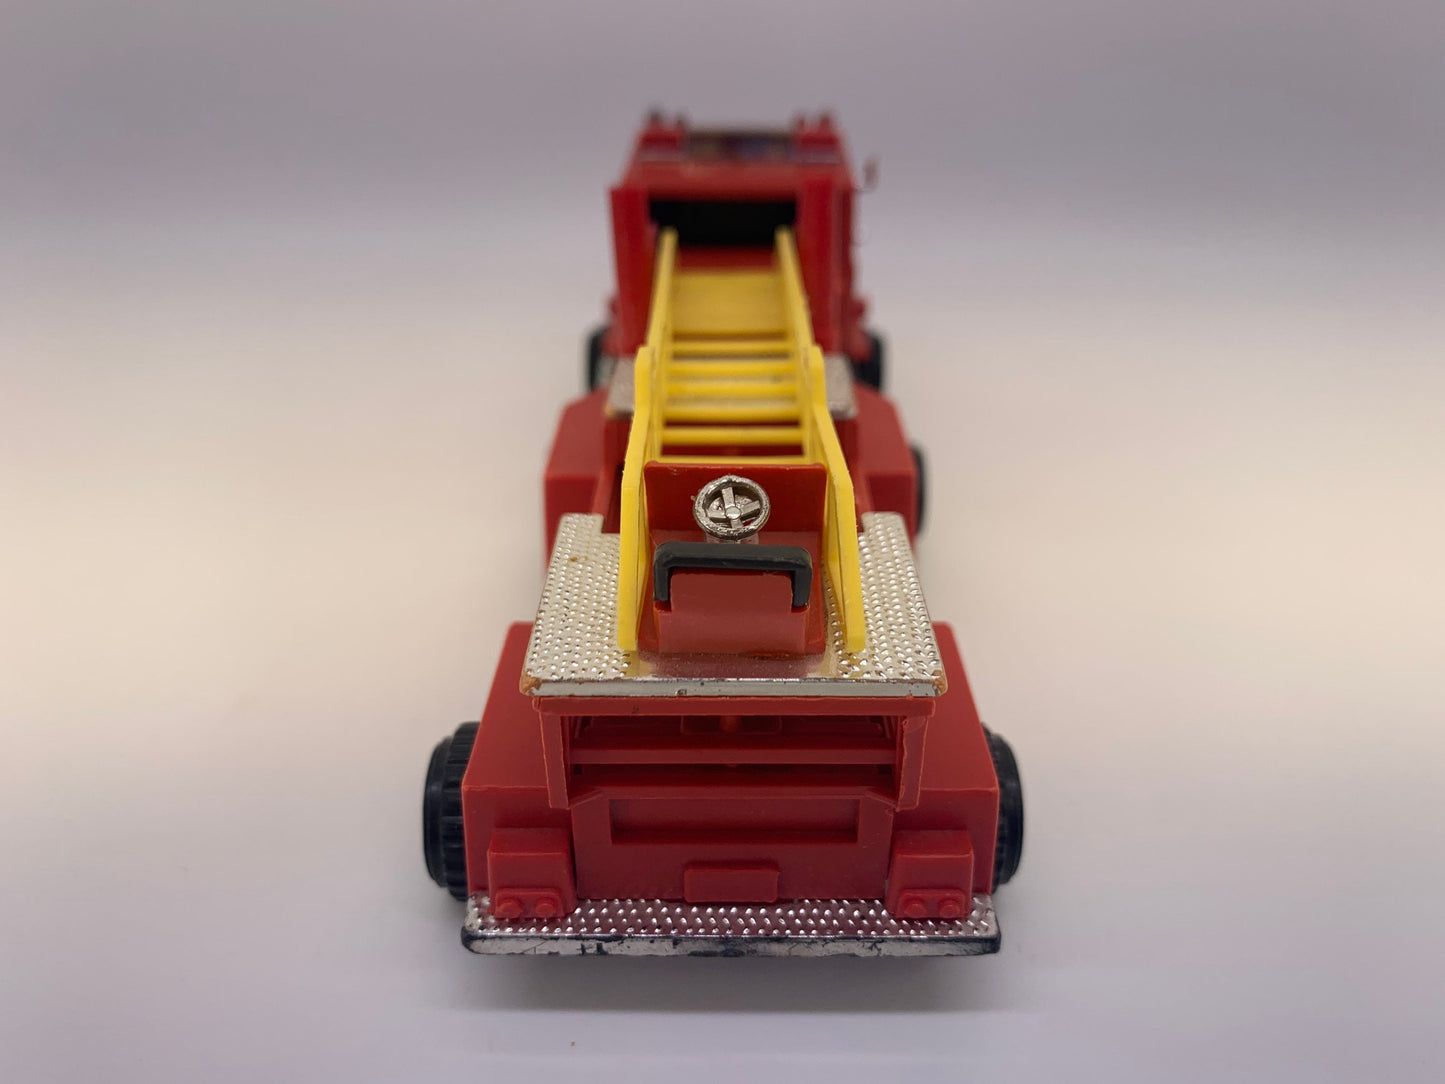 1976 Tiny Mighty Mo Fire Ladder Engine Truck Red IDEAL Collectable Miniature Scale Model Toy Car Perfect Birthday Gift